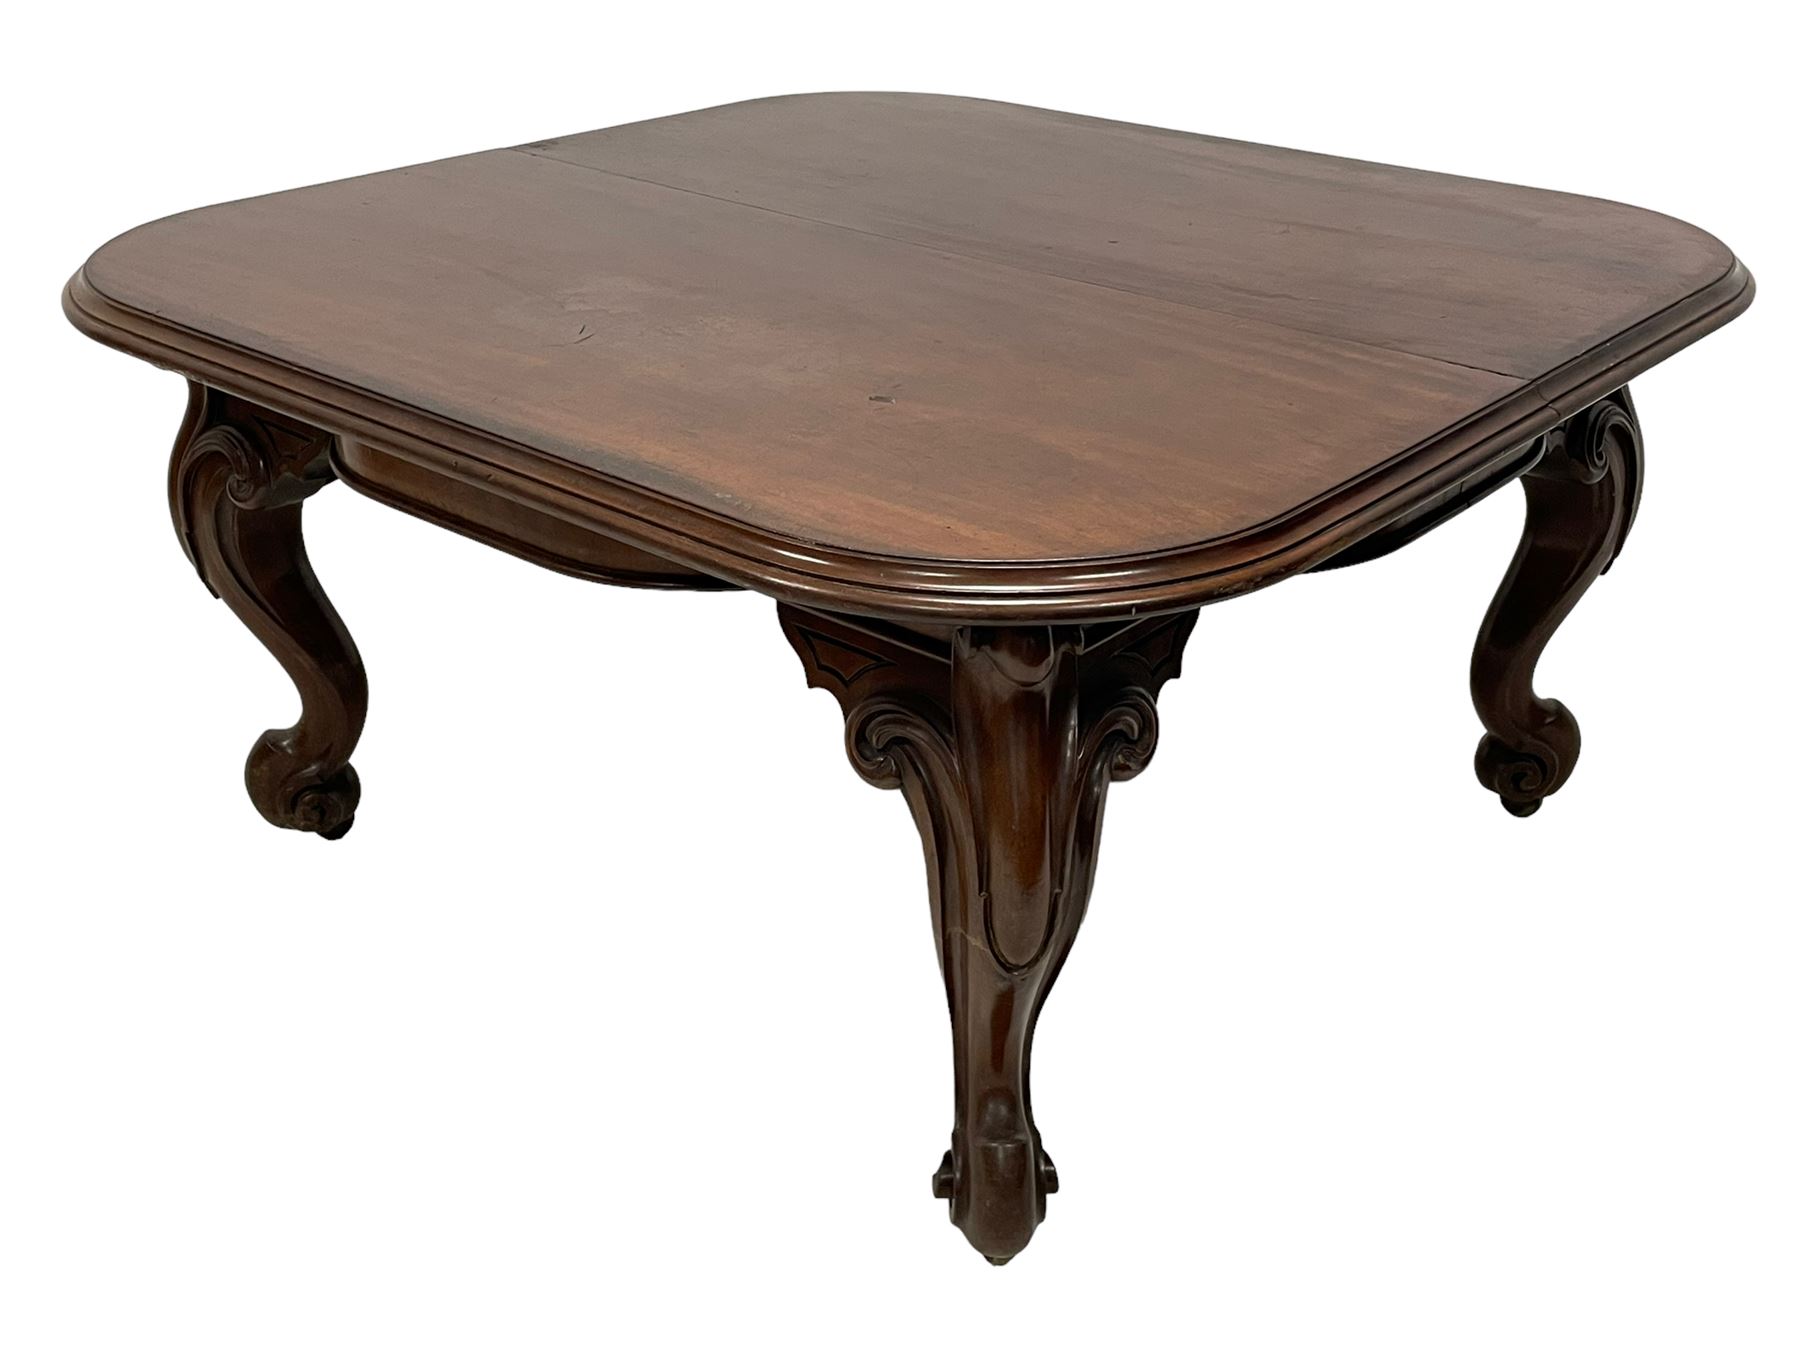 Large 19th century mahogany dining table - Image 2 of 30